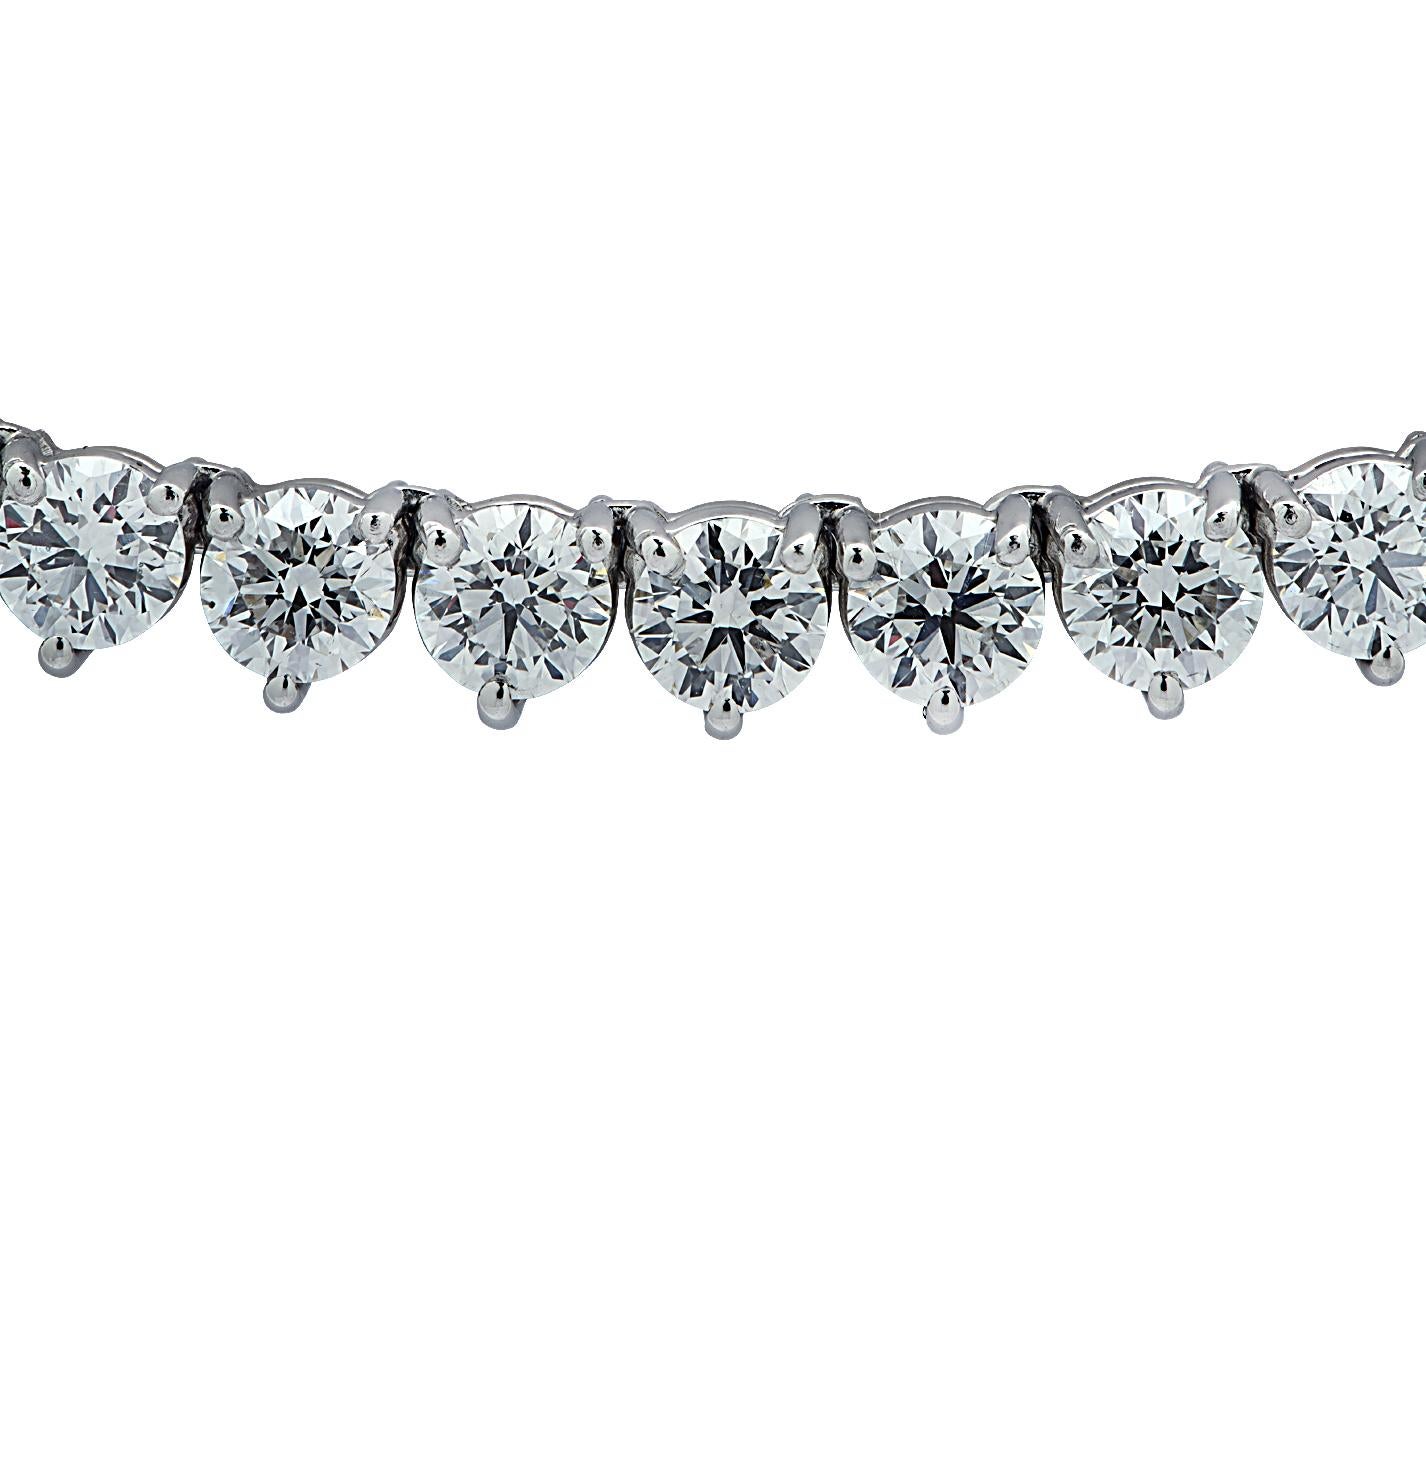 Exquisite Vivid Diamonds Straight Line diamond tennis necklace crafted in Platinum, showcasing 94 round brilliant cut diamonds weighing 25.39 carats, D color, VS-SI Clarity. Each diamond was carefully selected, perfectly matched and set in a